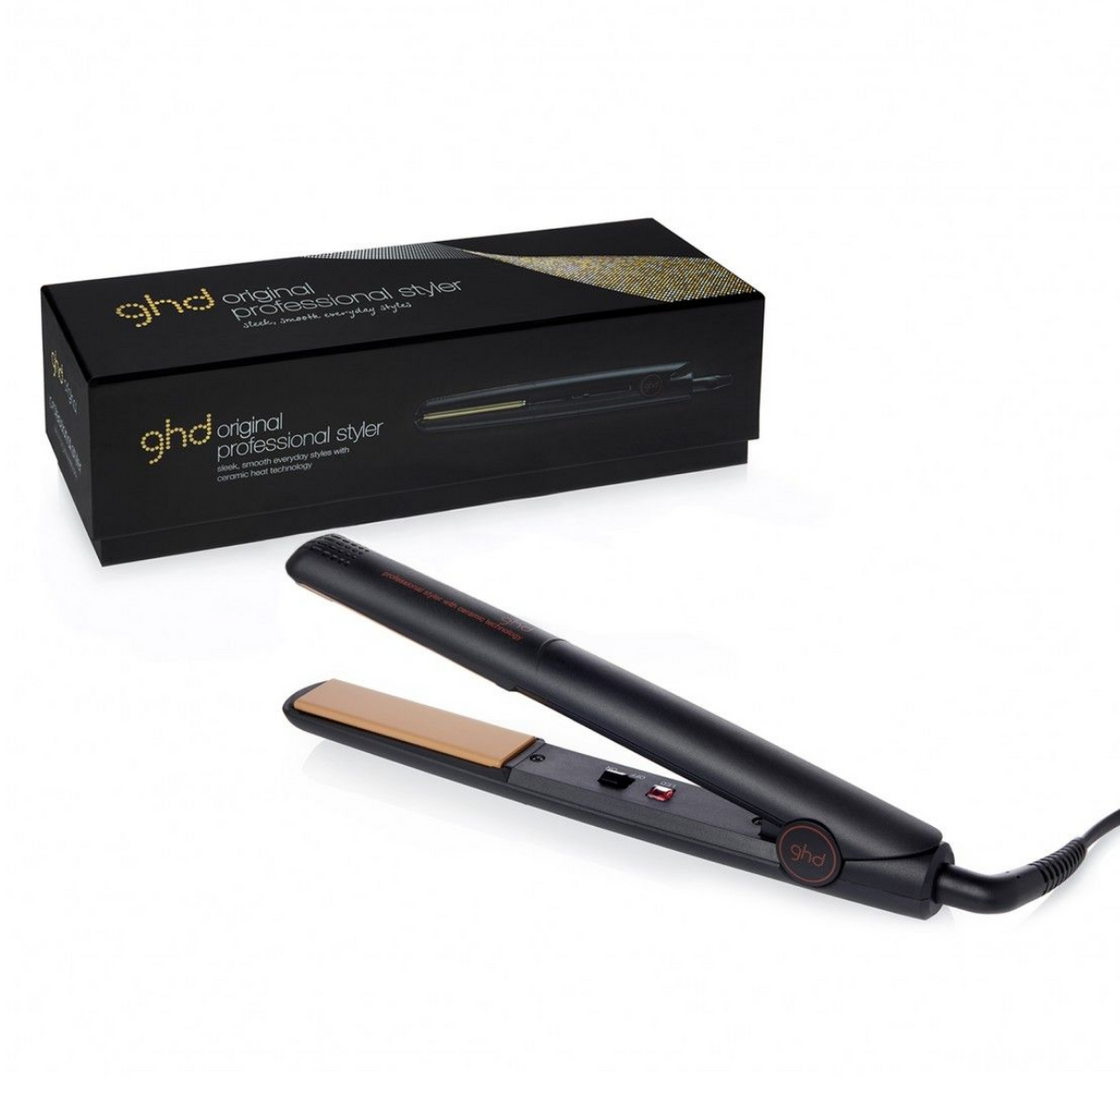 ghd new original Styler piastra professionale